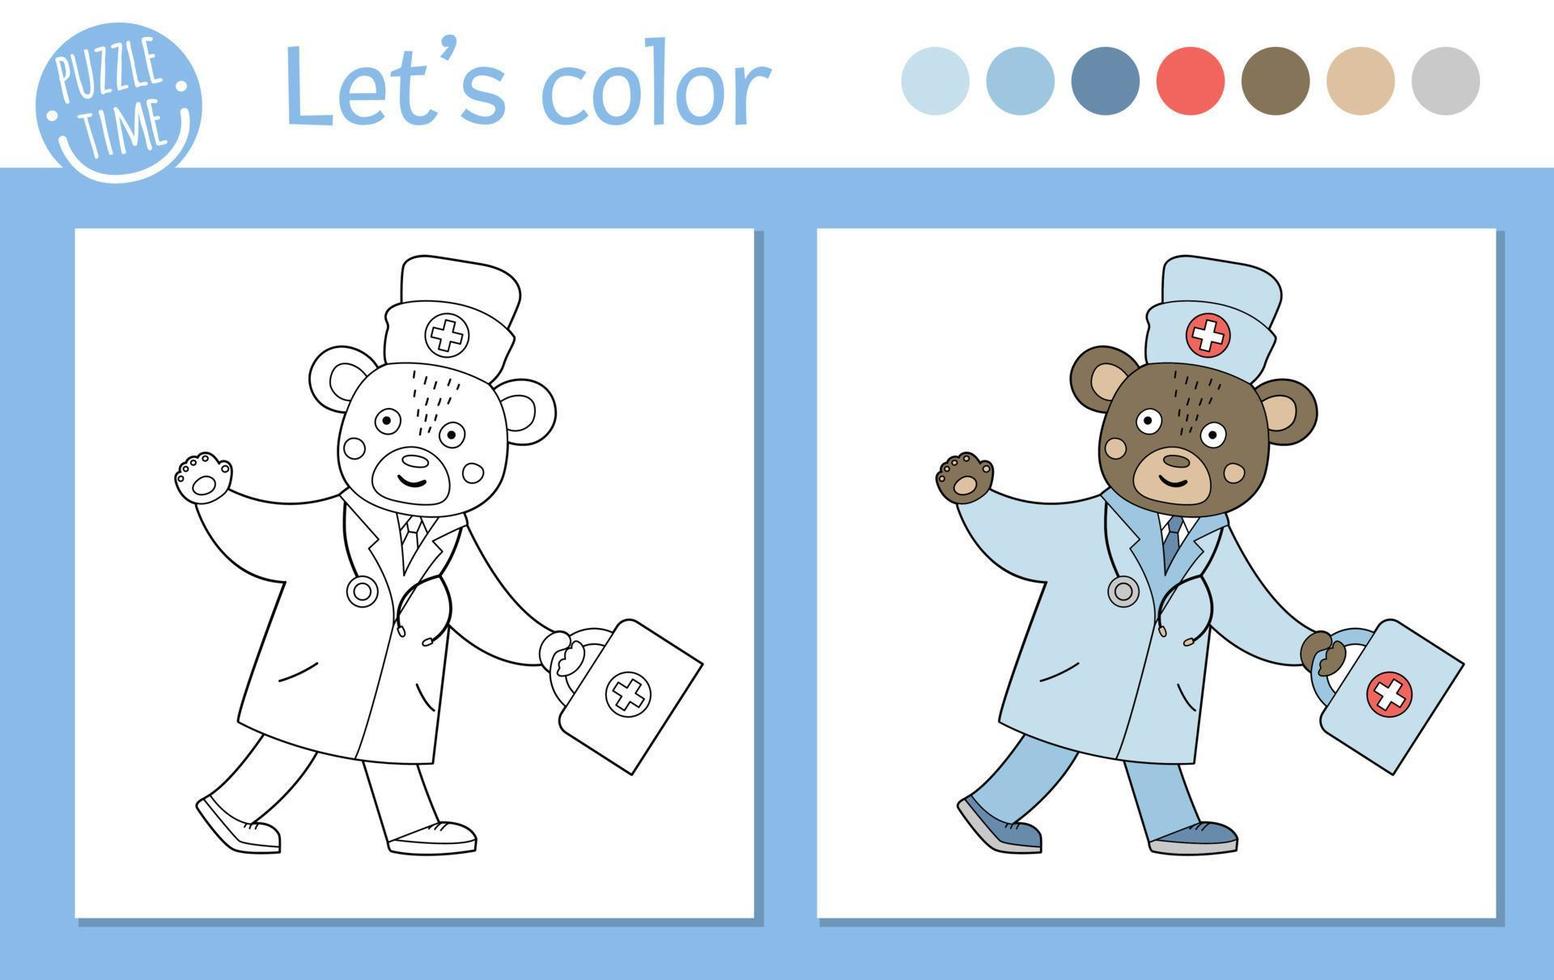 Medicine coloring page for children. Vector bear doctor going with first aid kit and waving his hand. Cute funny animal character outline. Healthcare color book isolated on white background